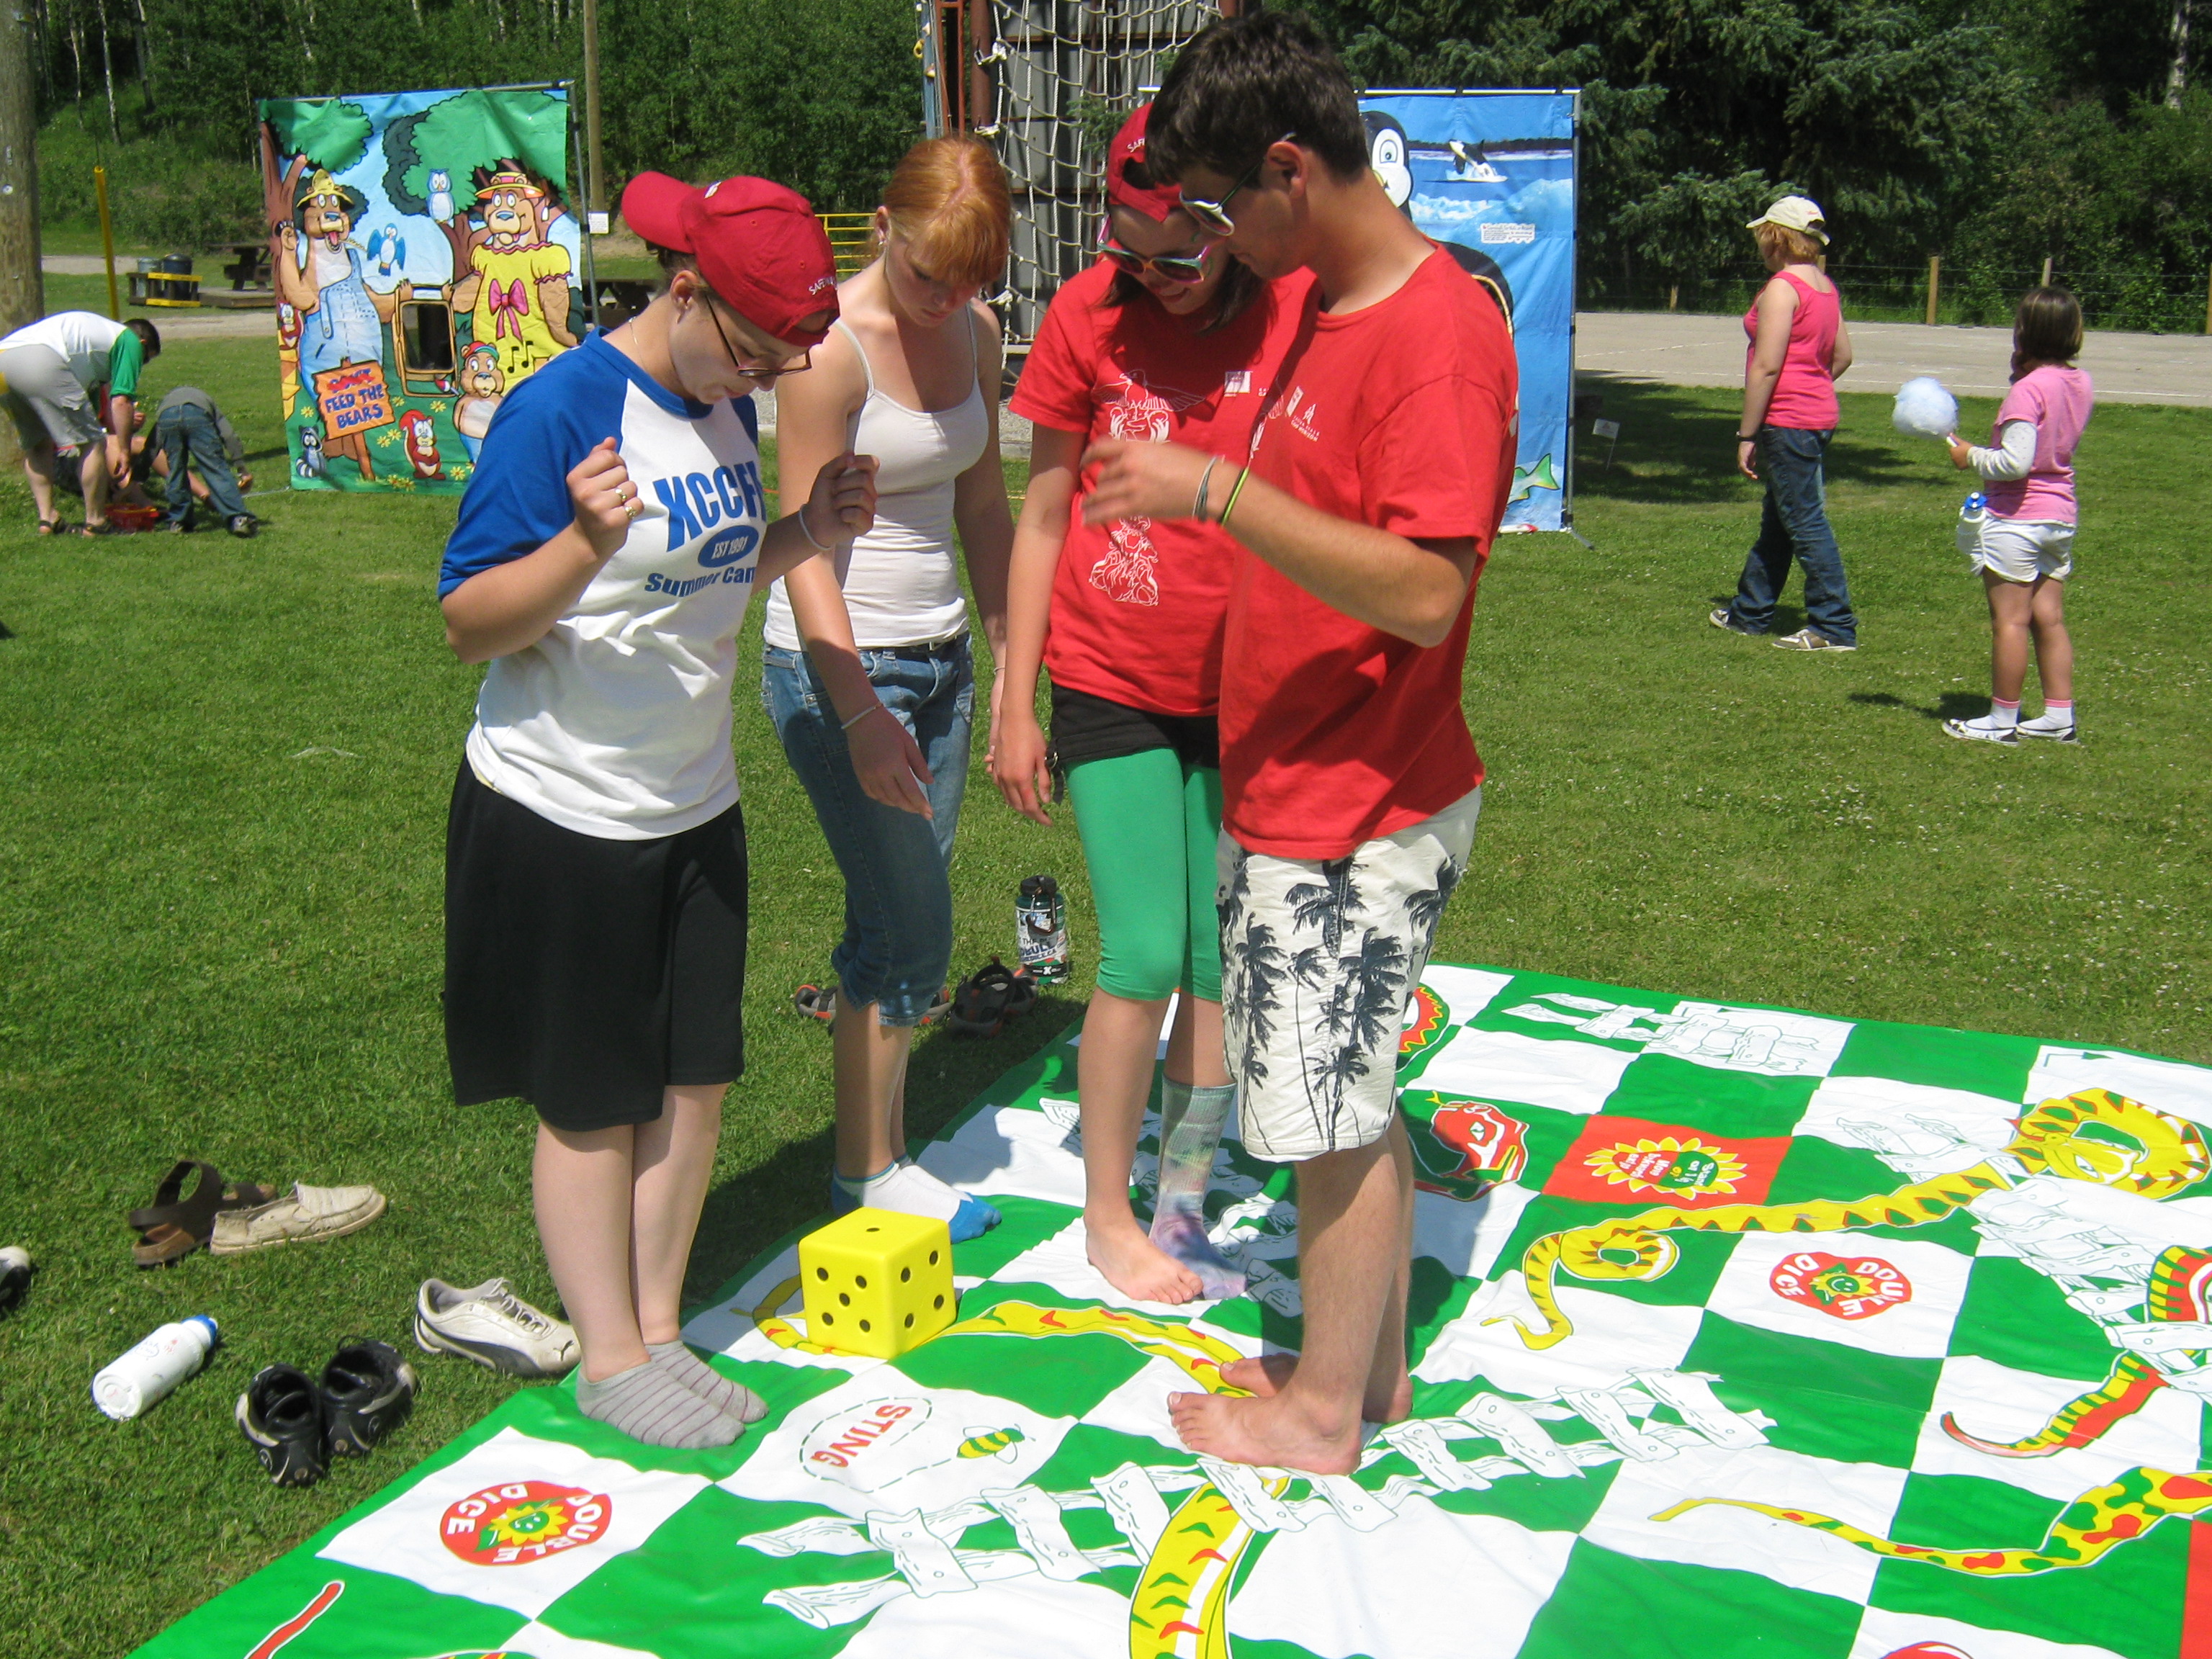 Giant Snakes and Ladders | Carnivals for Kids at Heart3072 x 2304